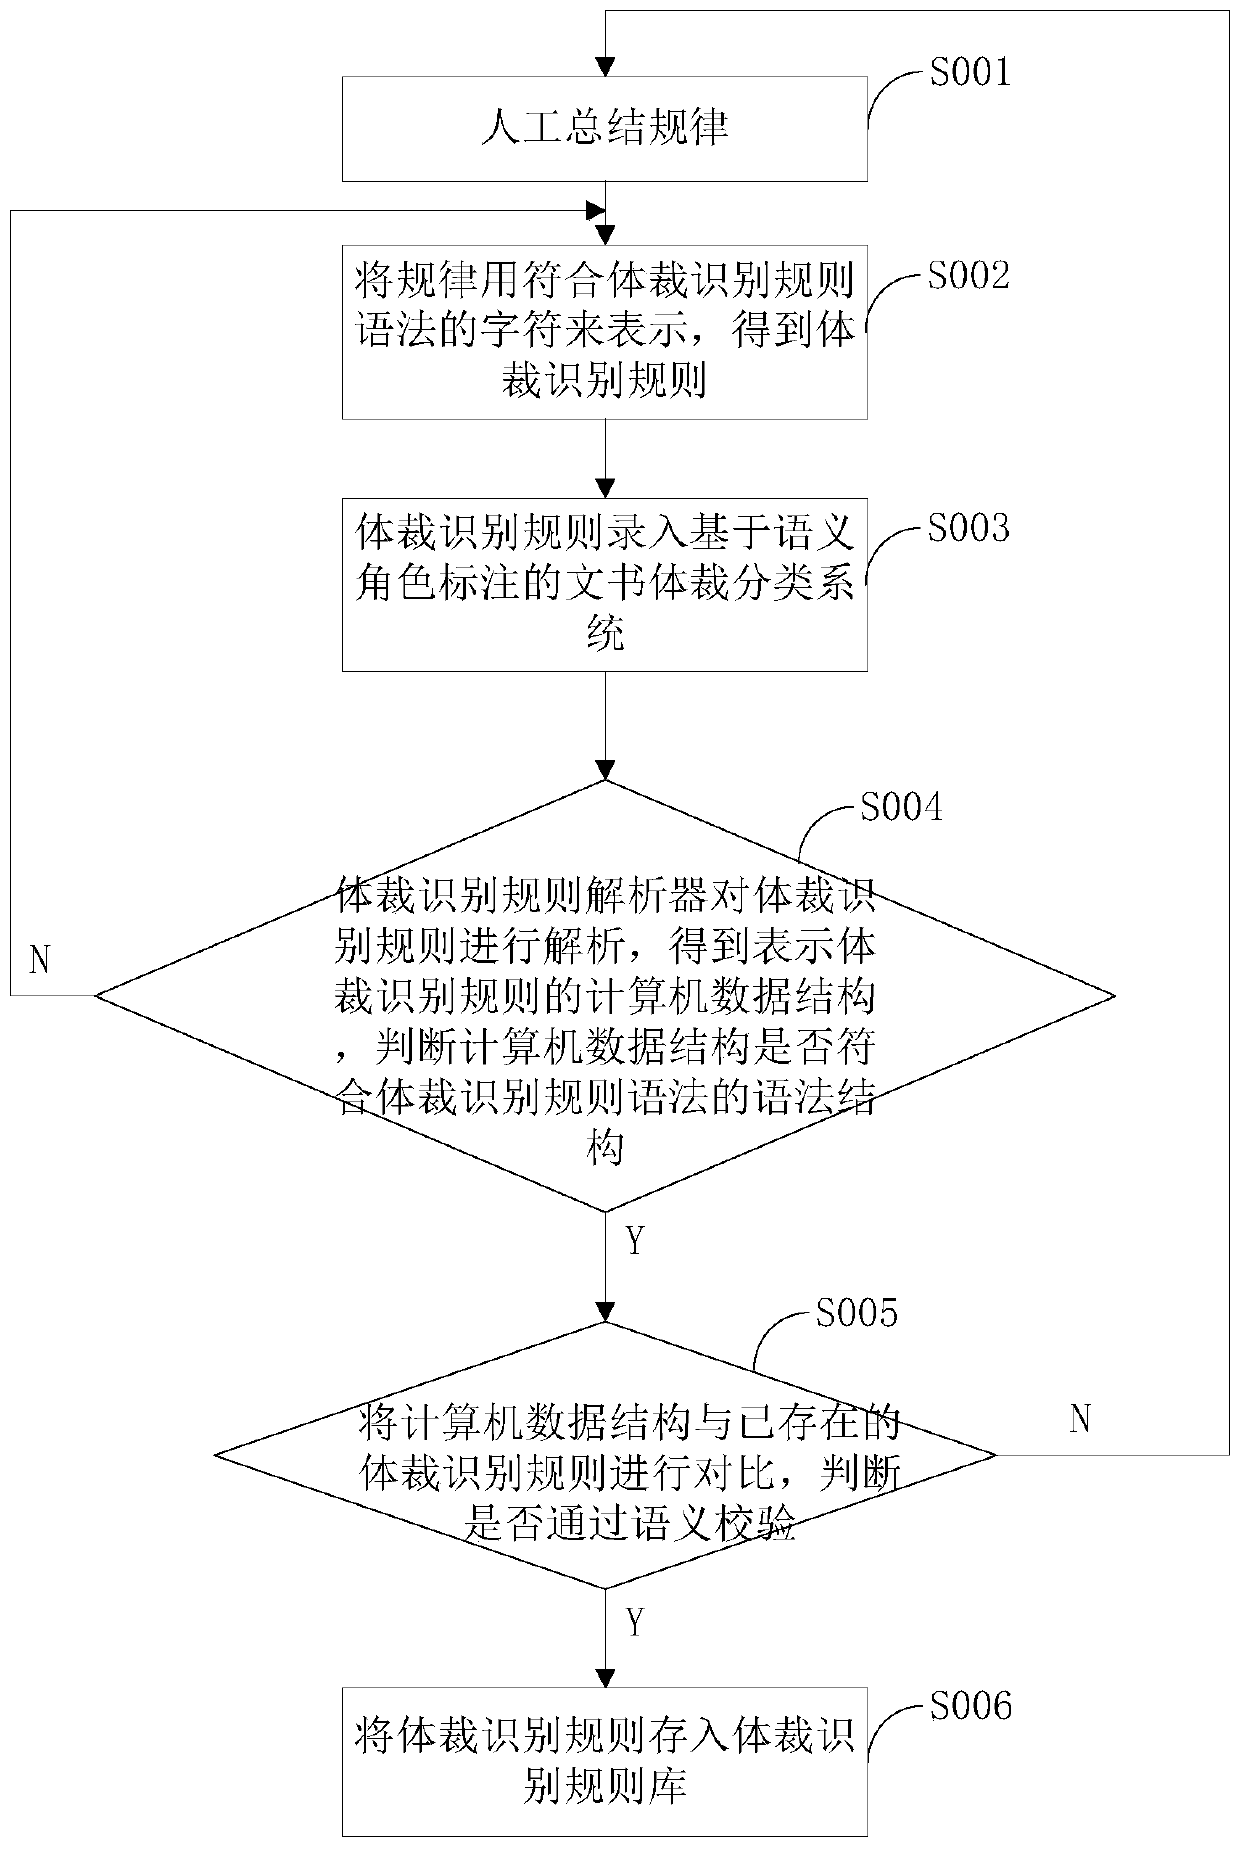 A semantic role annotation-based document body cutting and classifying system and a semantic role annotation-based document body cutting and classifying method